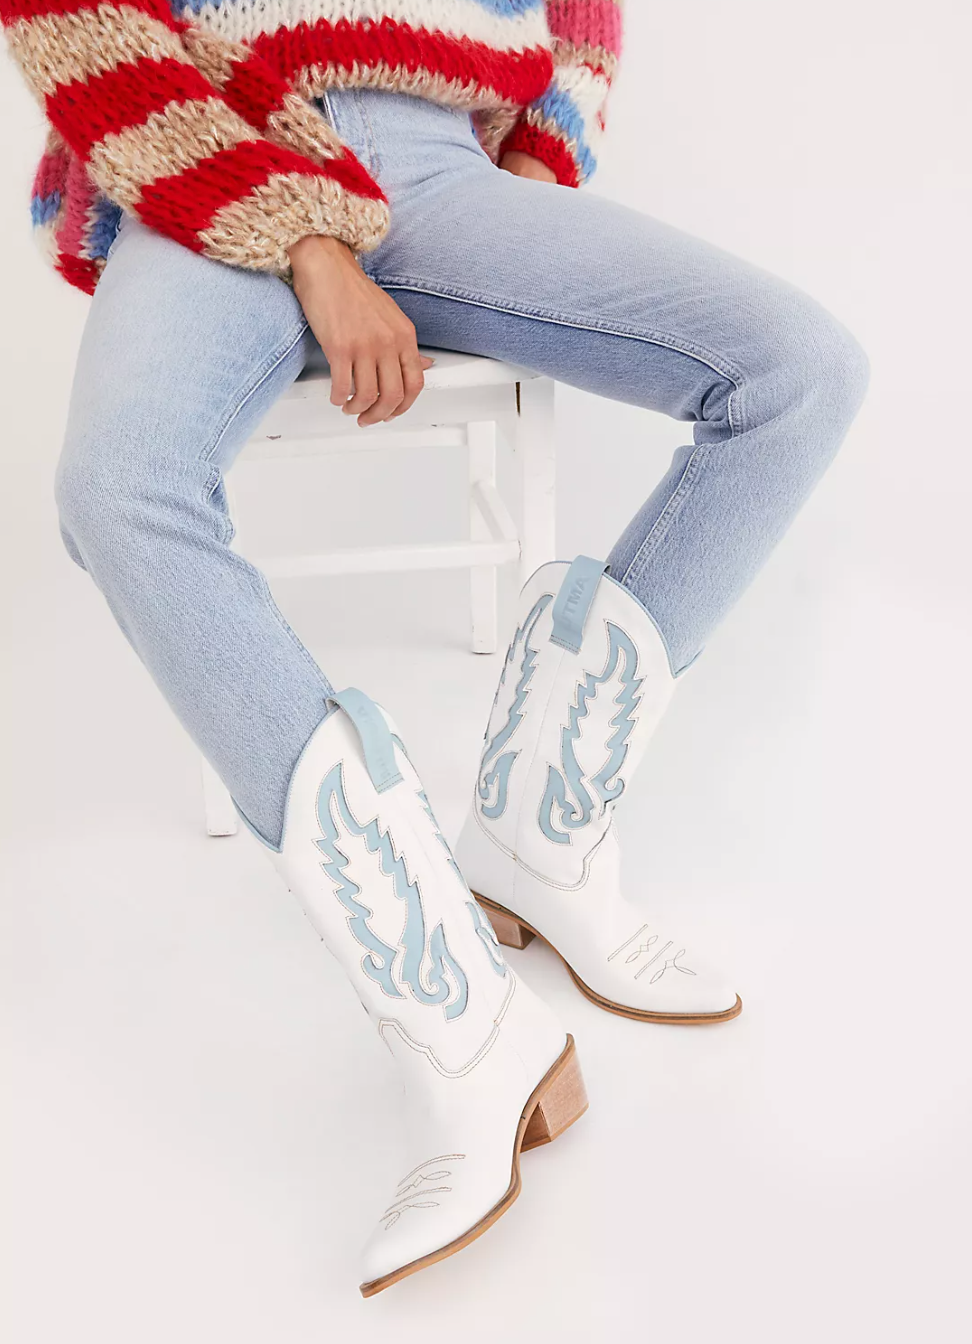 Model wearing jeans with white and light blue cowboy boots 